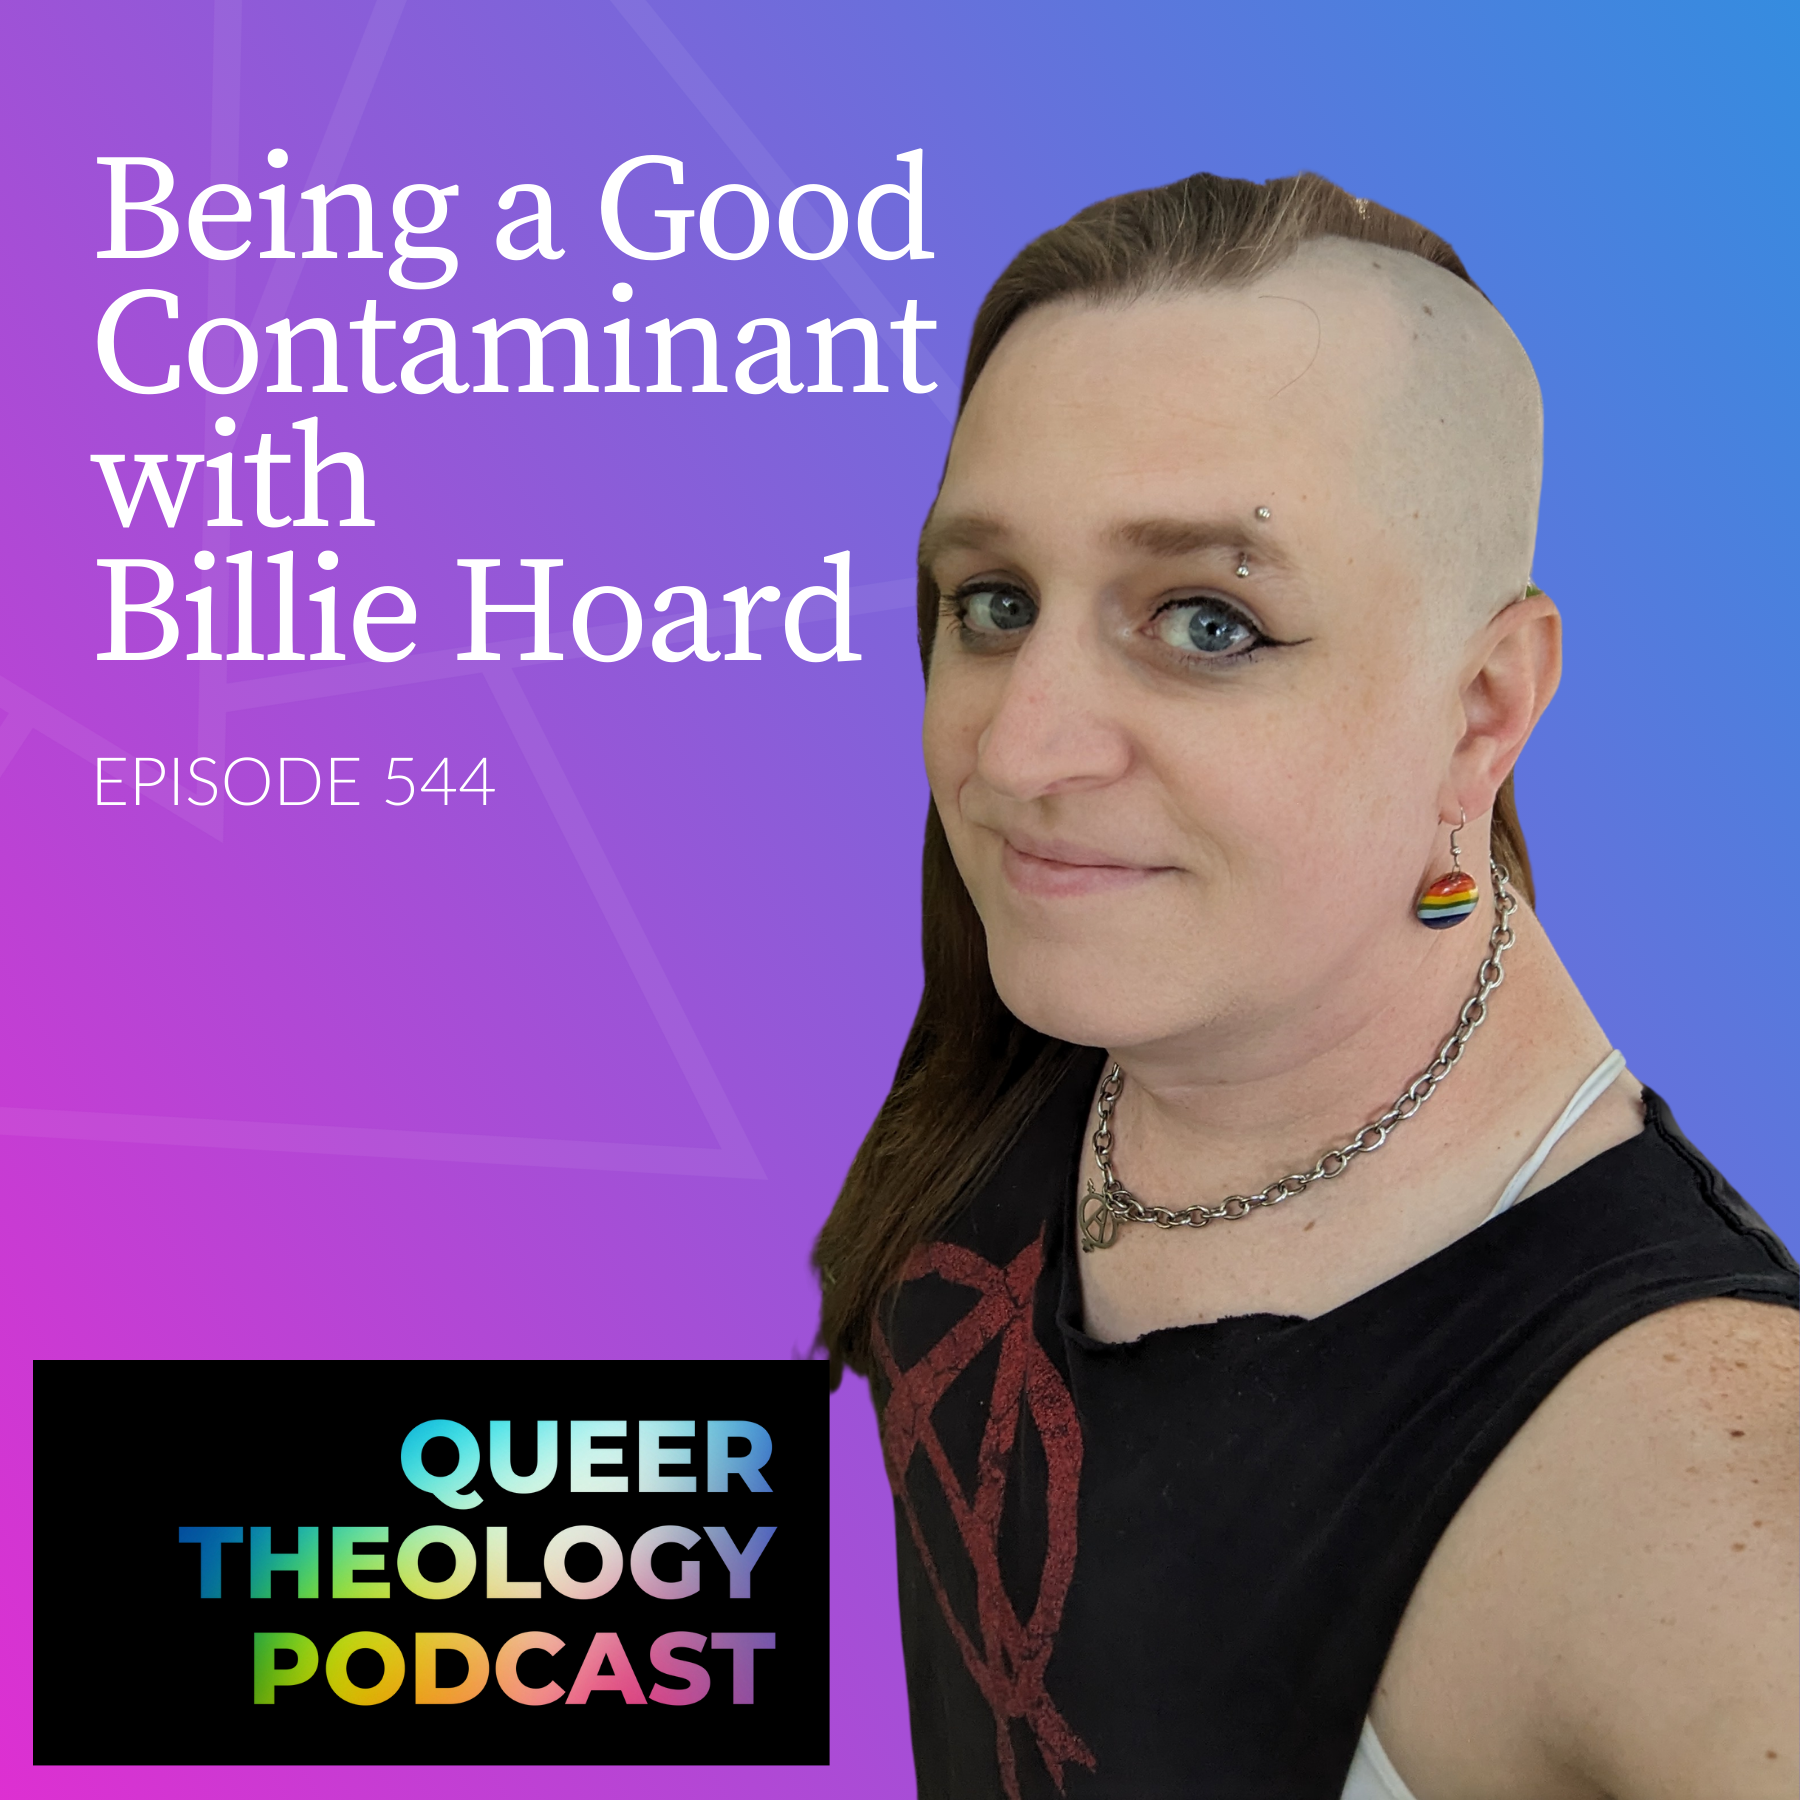 Being a Good Contaminant with Billie Hoard